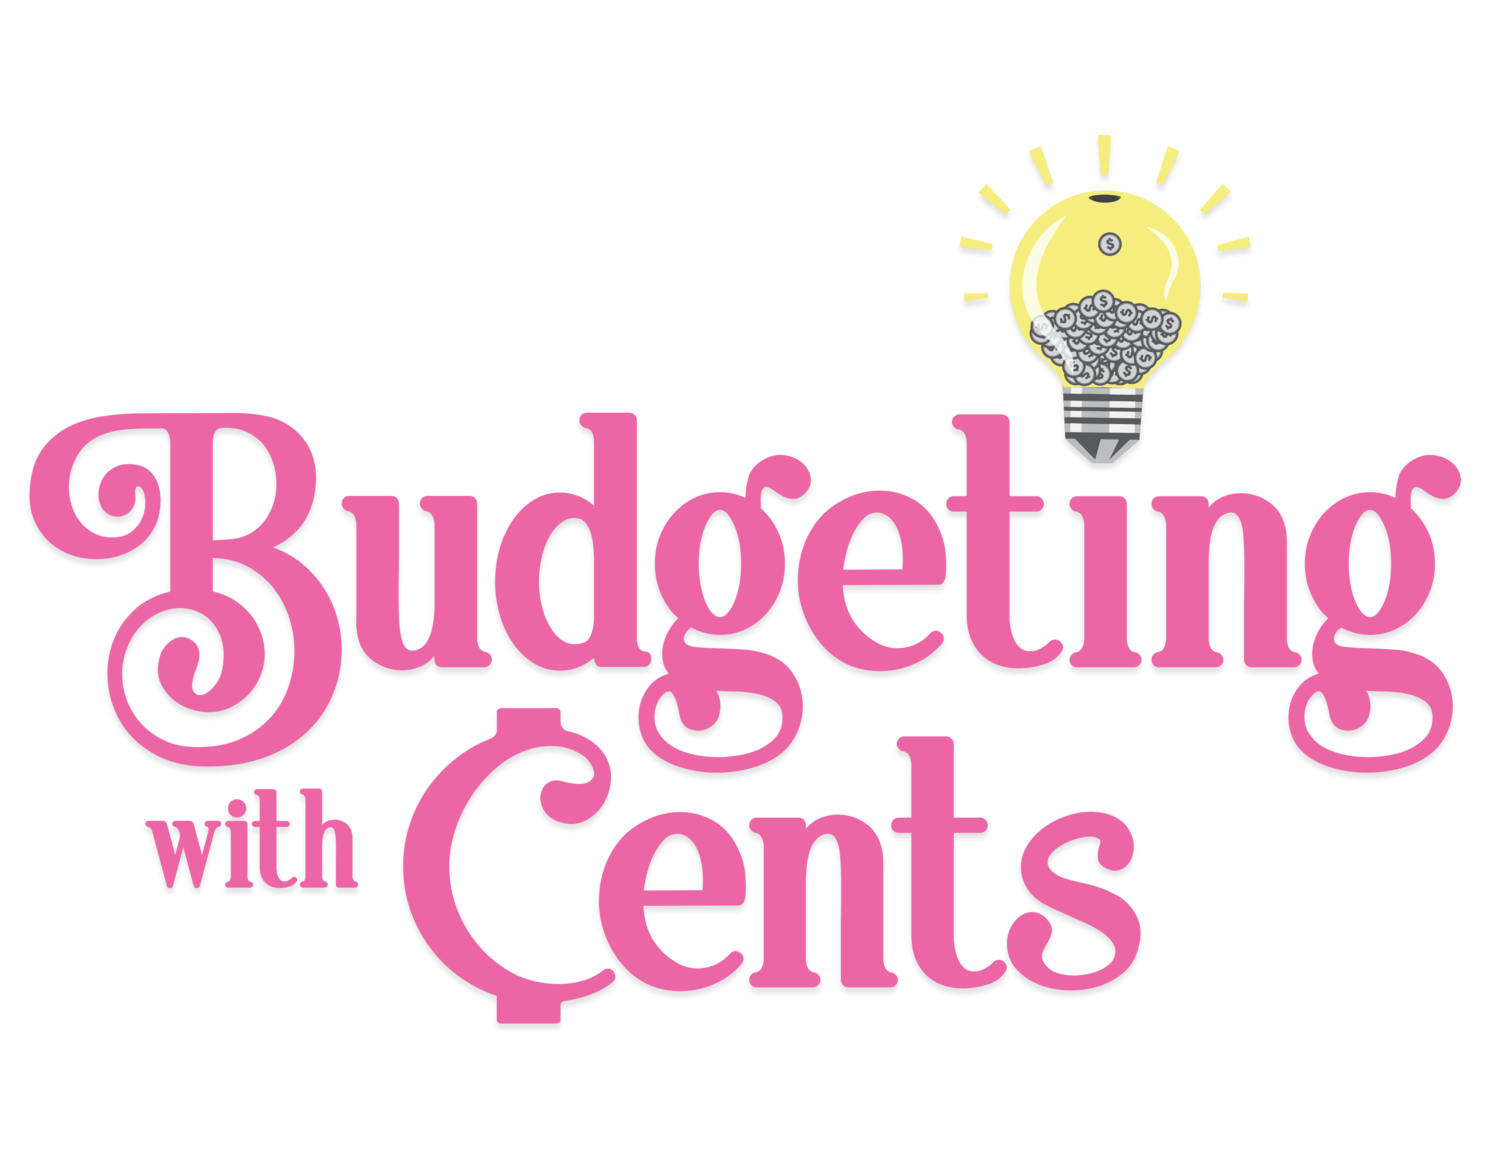 Budgeting with Cents